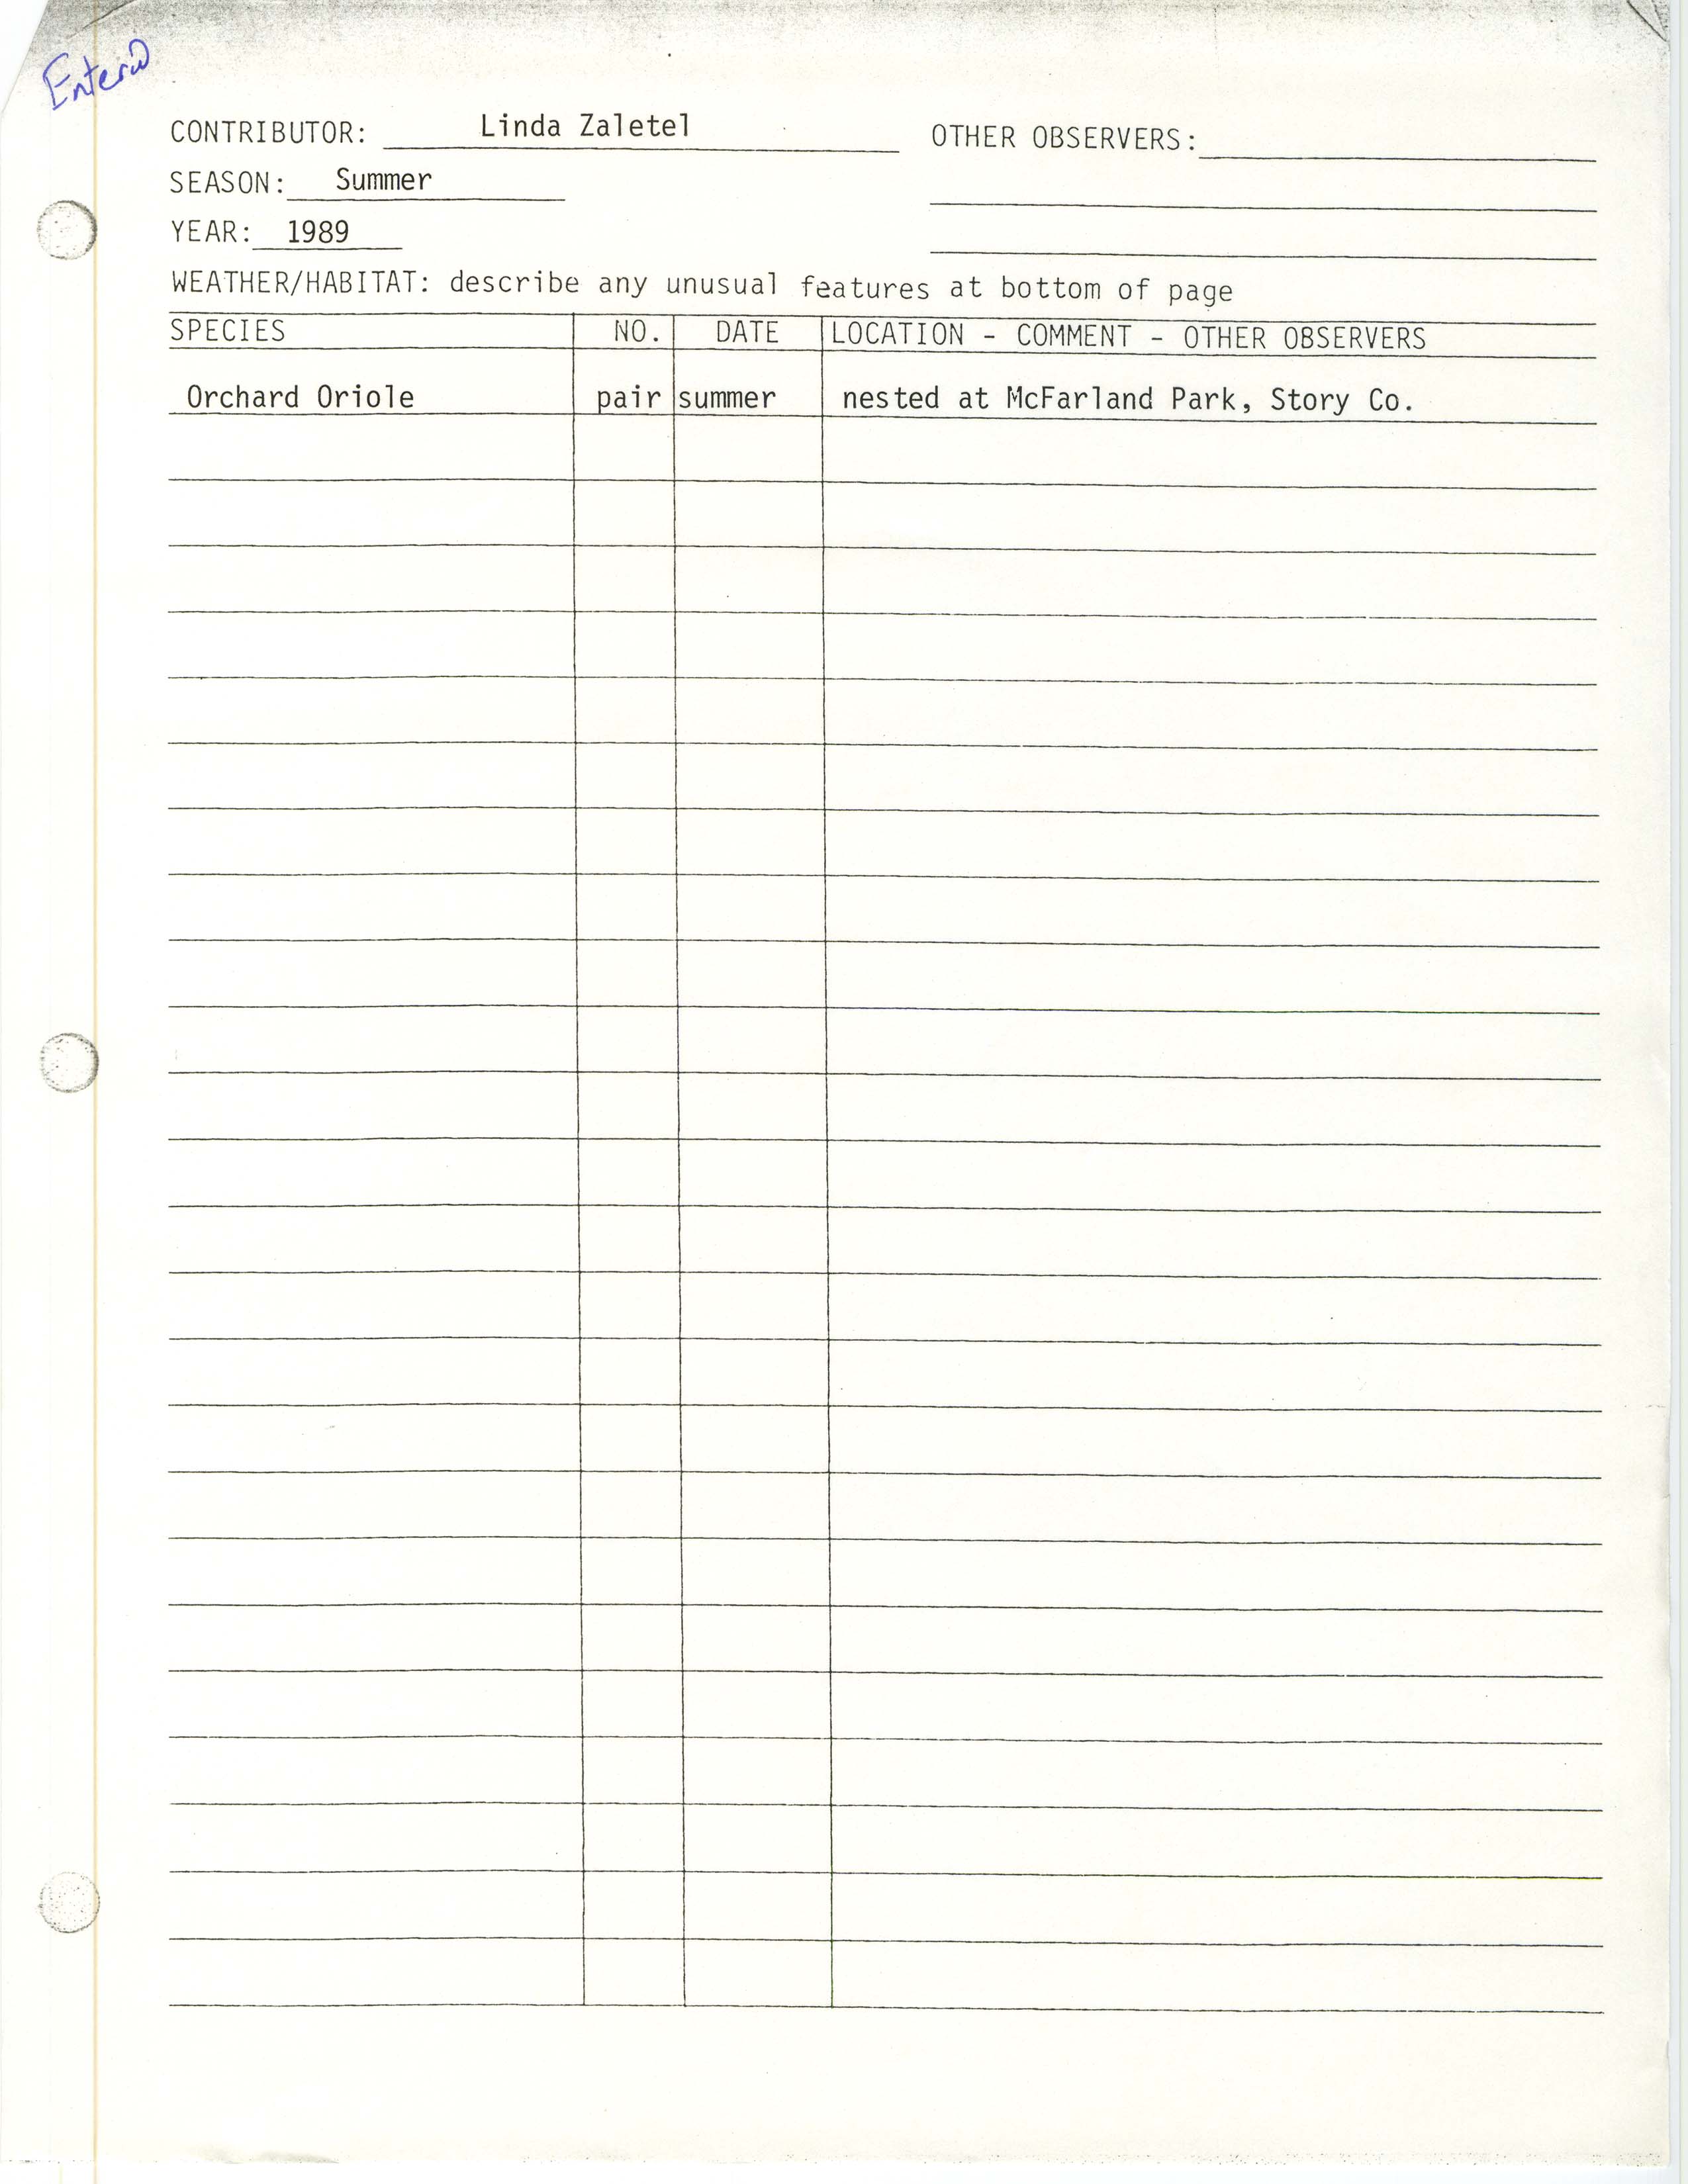 Field note about an Orchard Oriole sighting contributed by Linda Zaletel, summer 1989